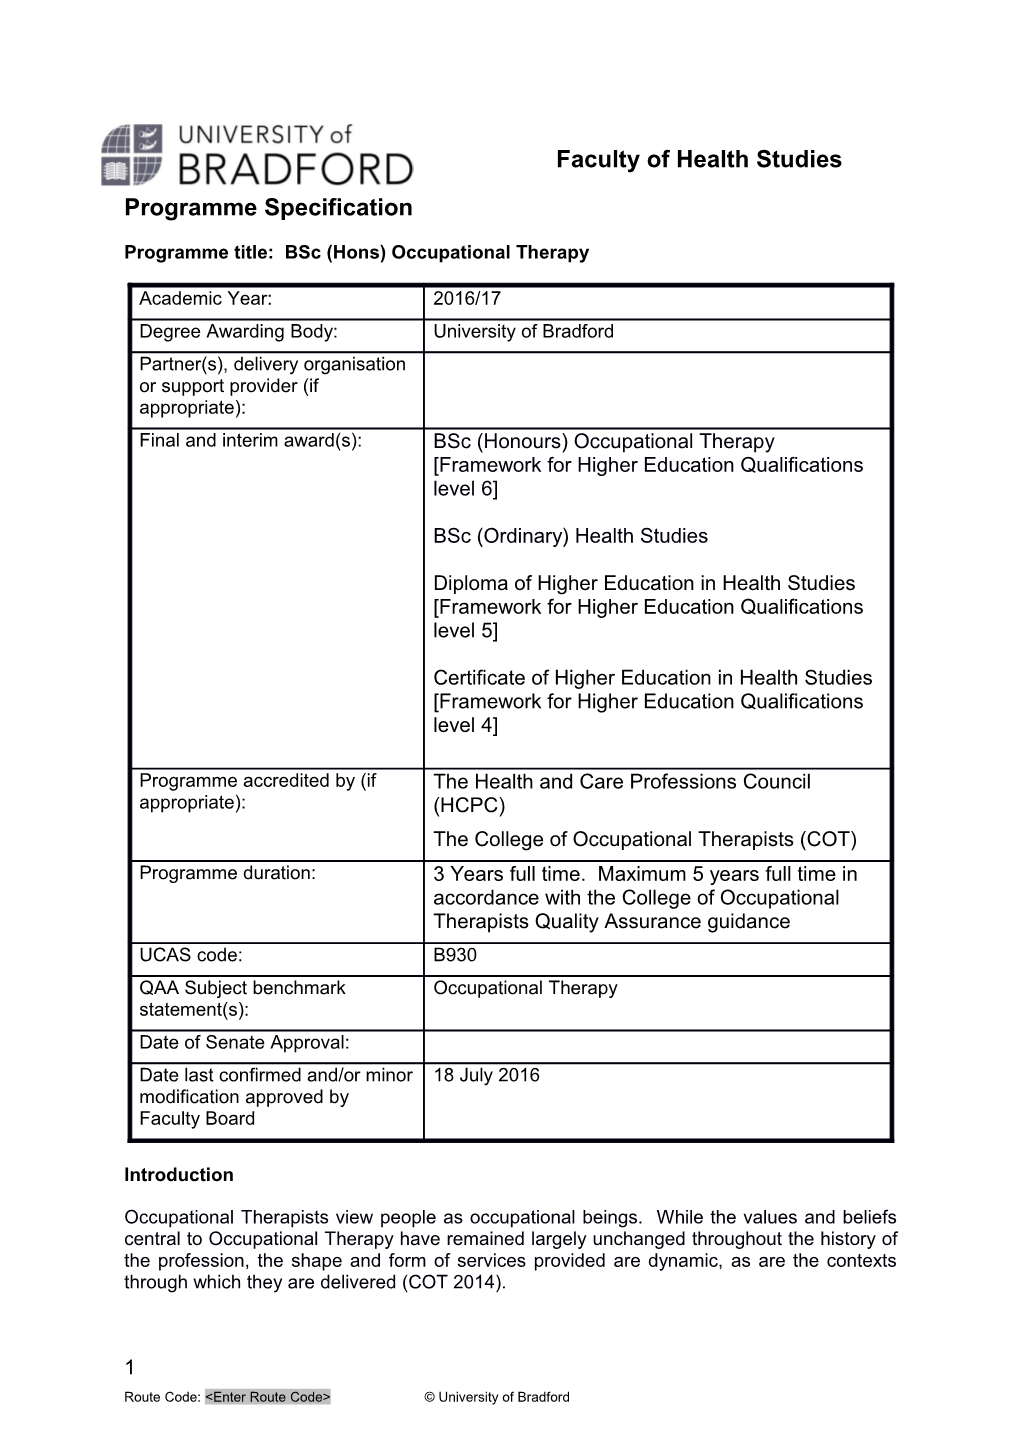 Programme Title: Bsc (Hons) Occupational Therapy